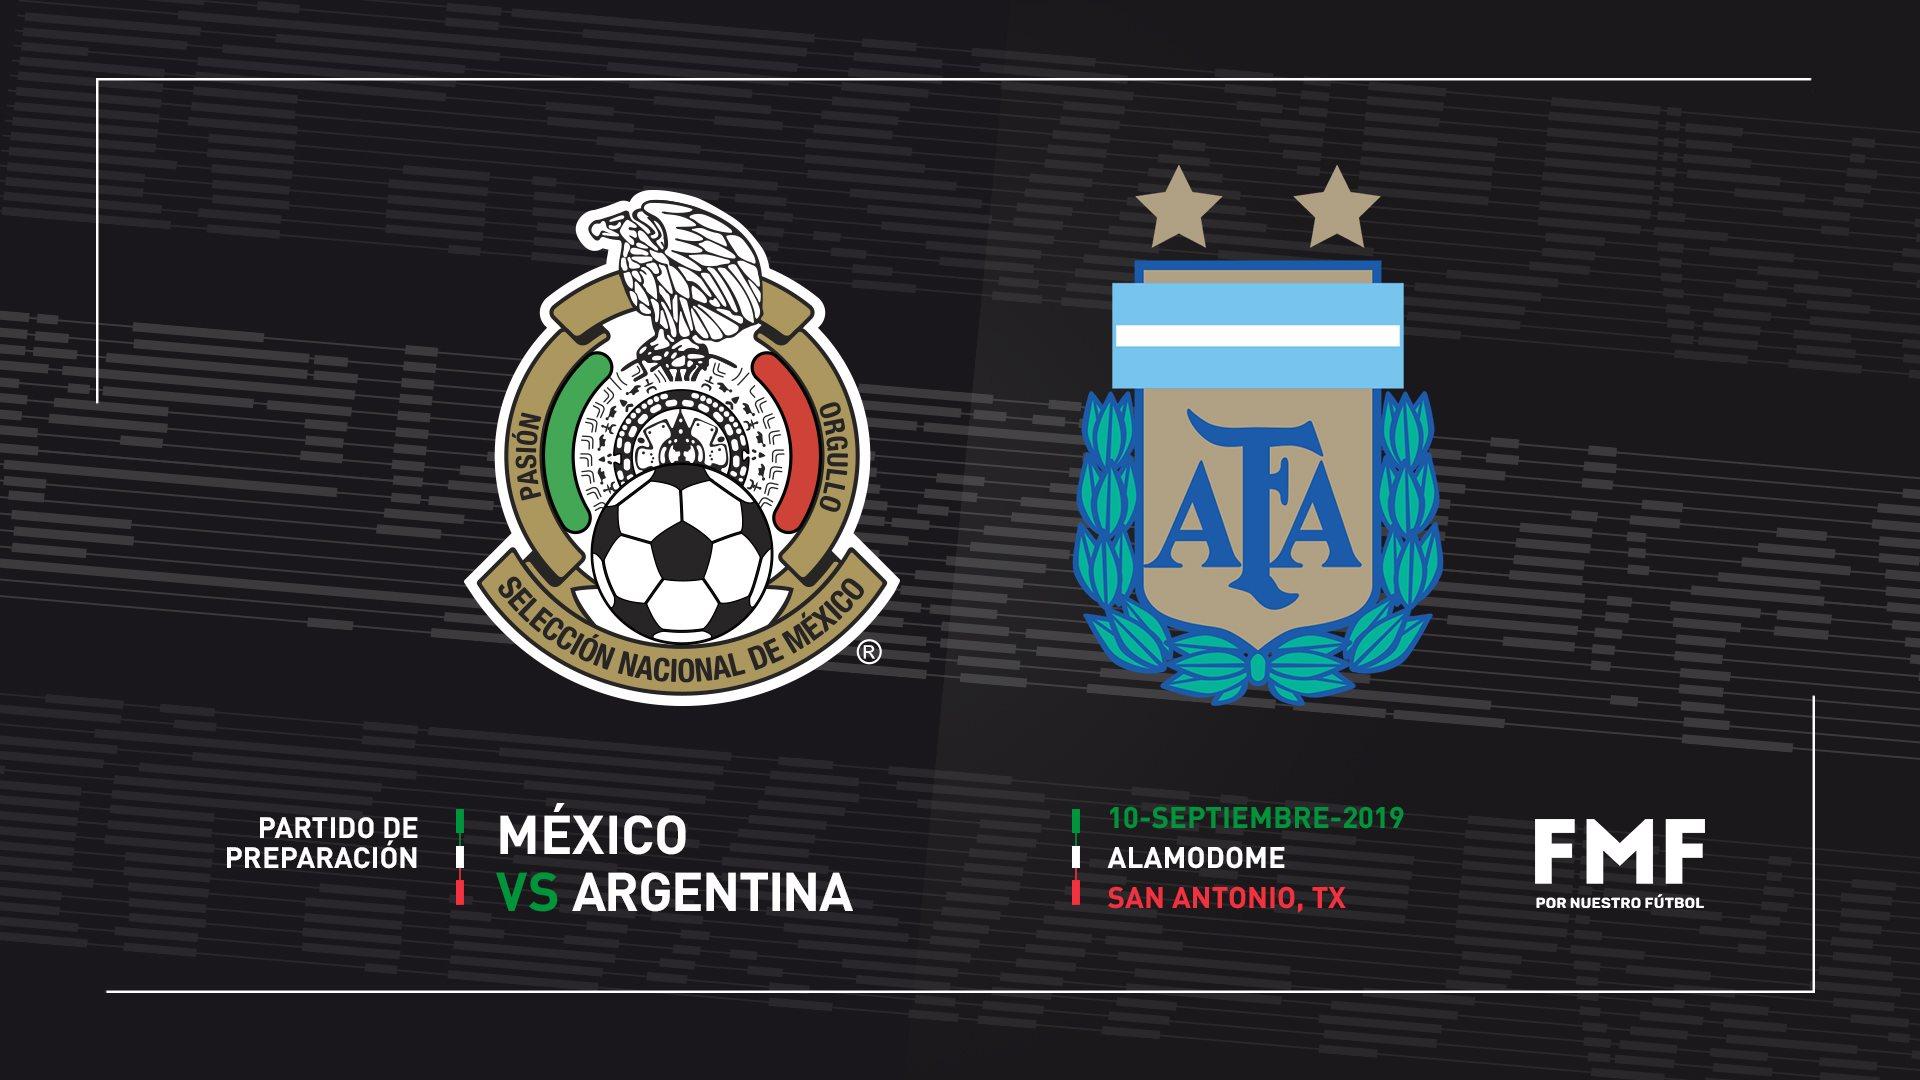 Alamodome Logo - Powerhouse Argentina to Battle Mexican National Team at San